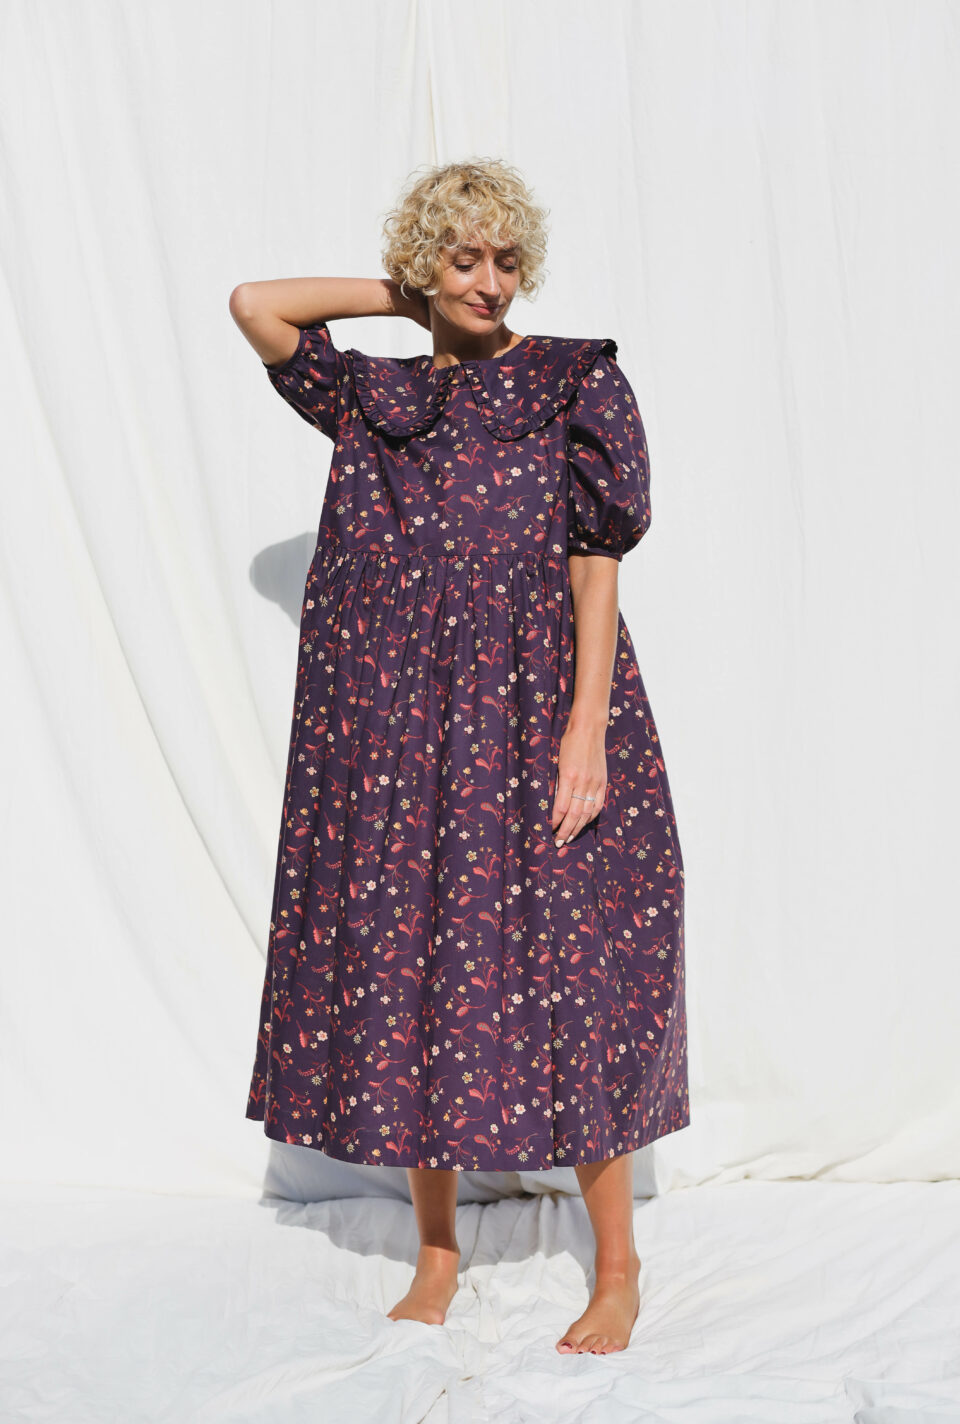 Floral cotton midi dress | Dress | Sustainable clothing | OffOn clothing